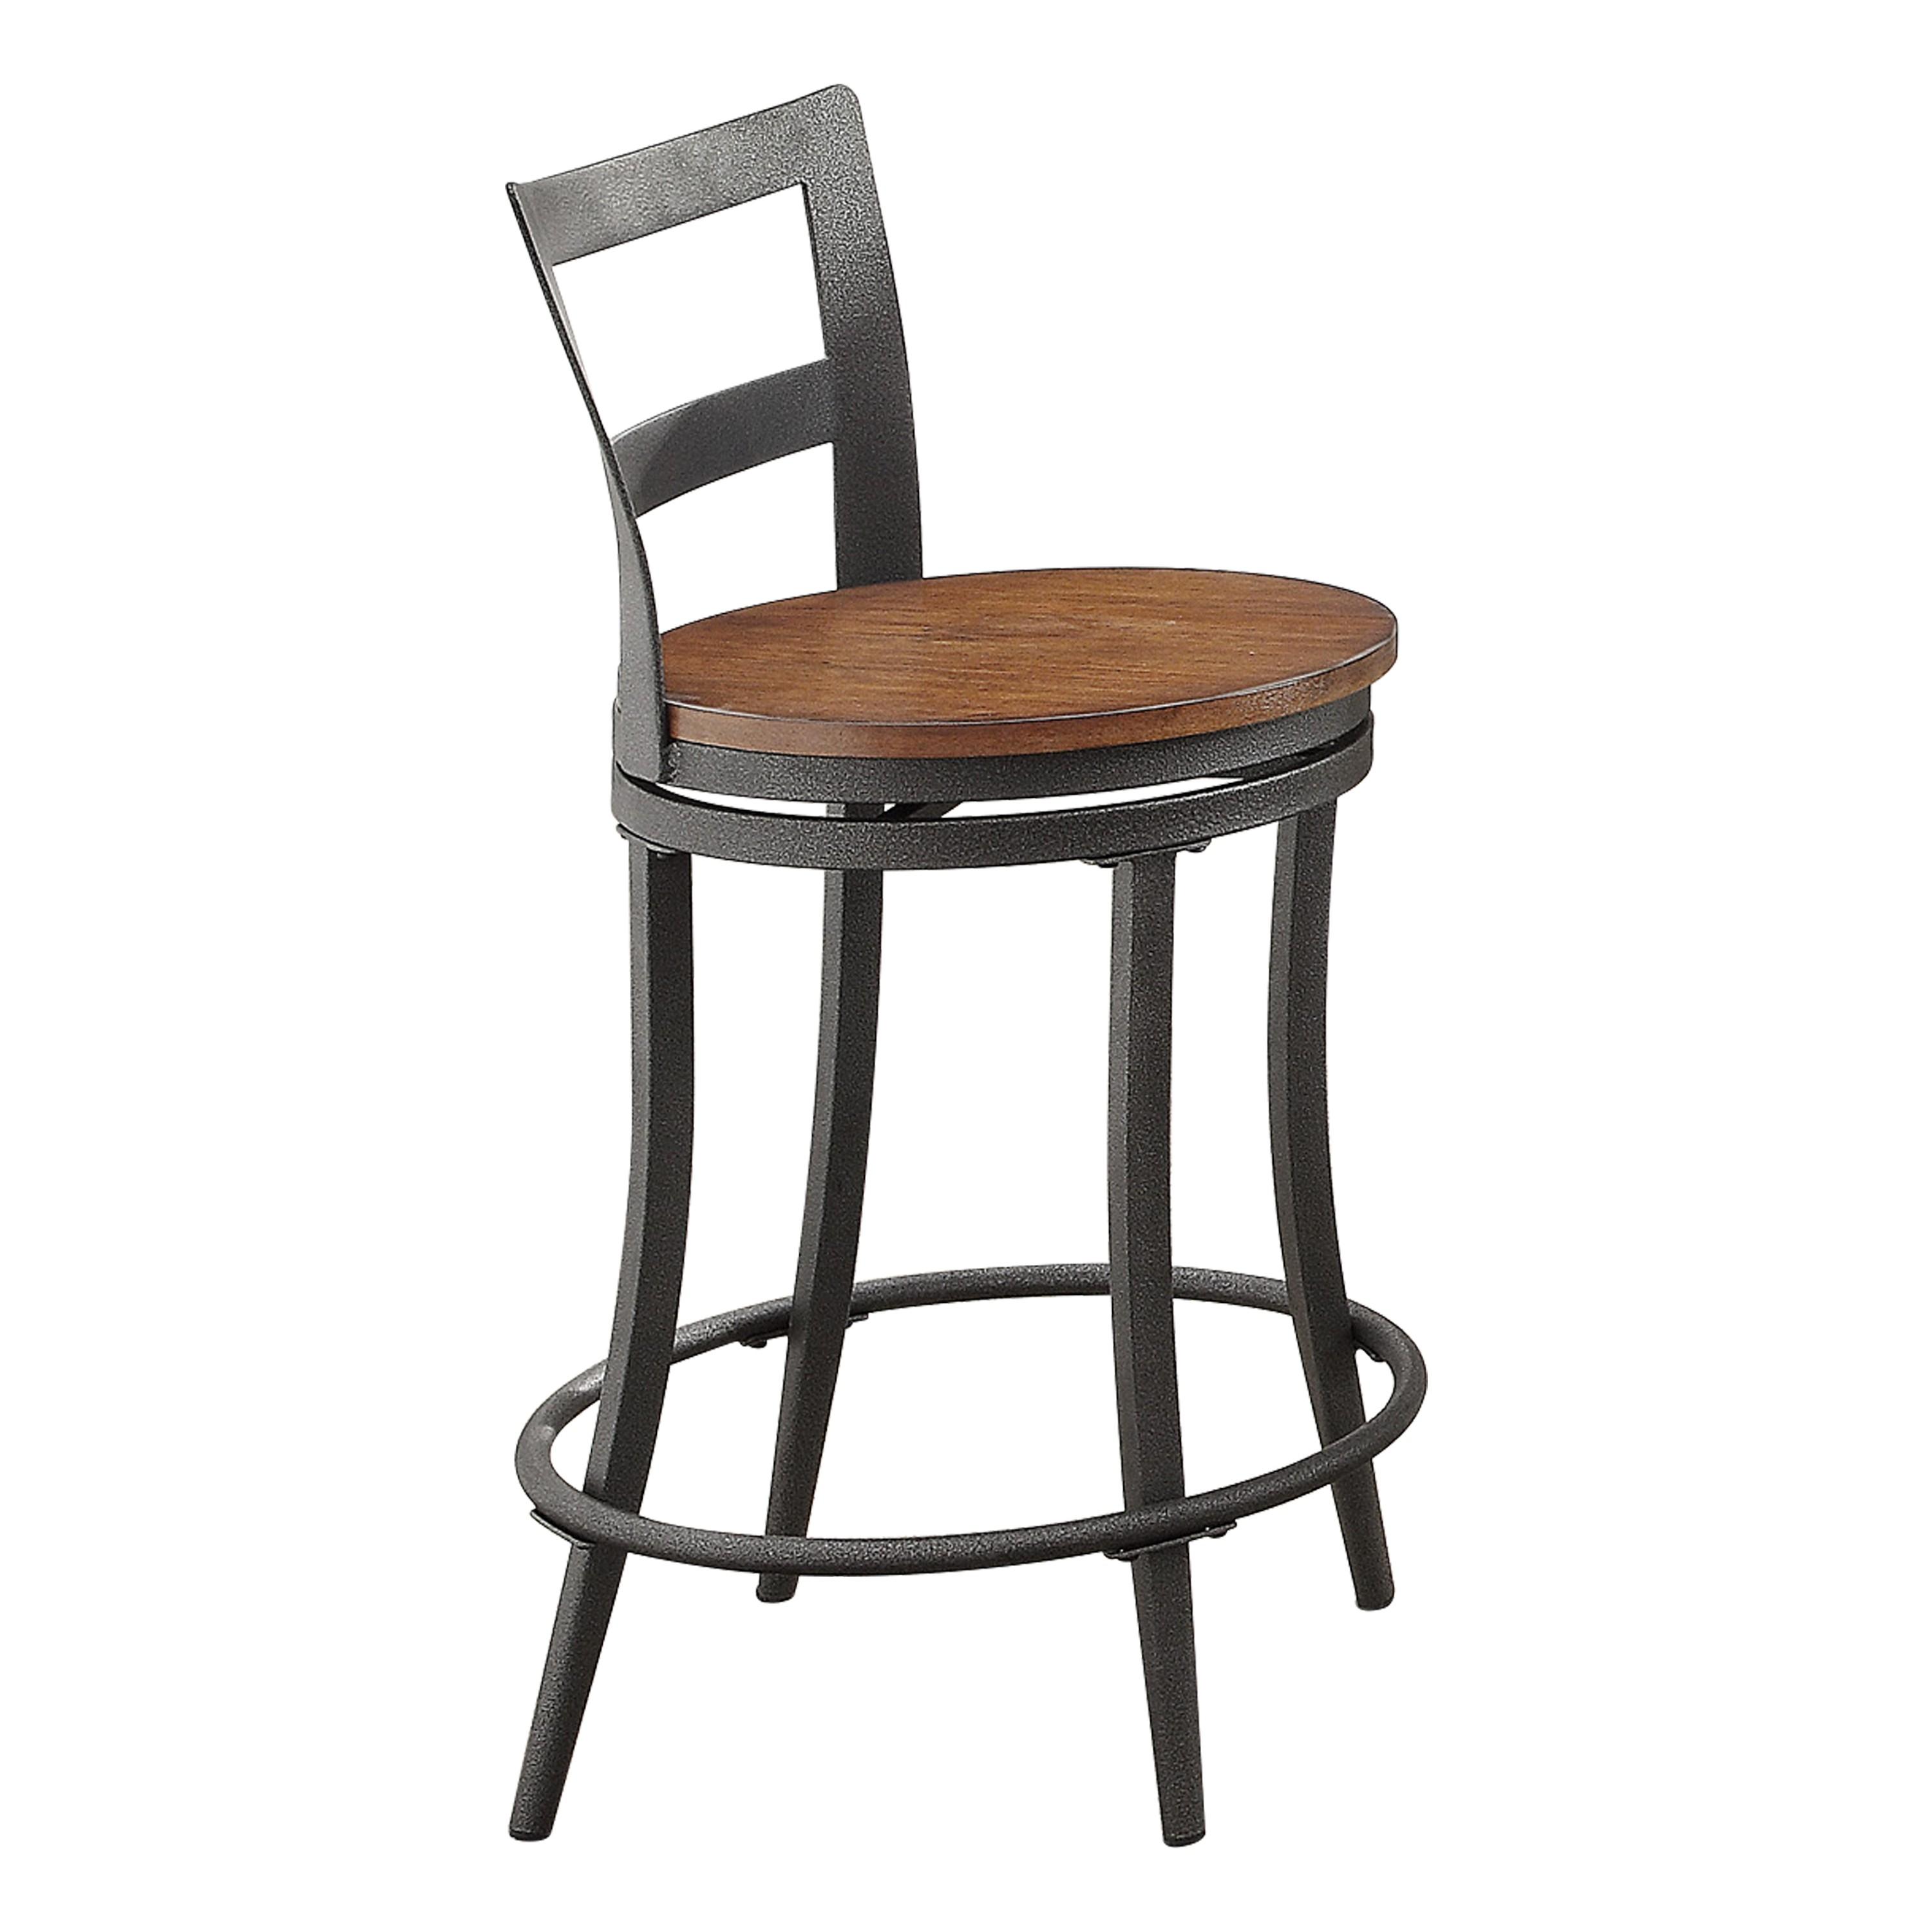 Rustic Counter Height Chair 5489-24 Selbyville 5489-24 in Gunmetal, Light Cherry 